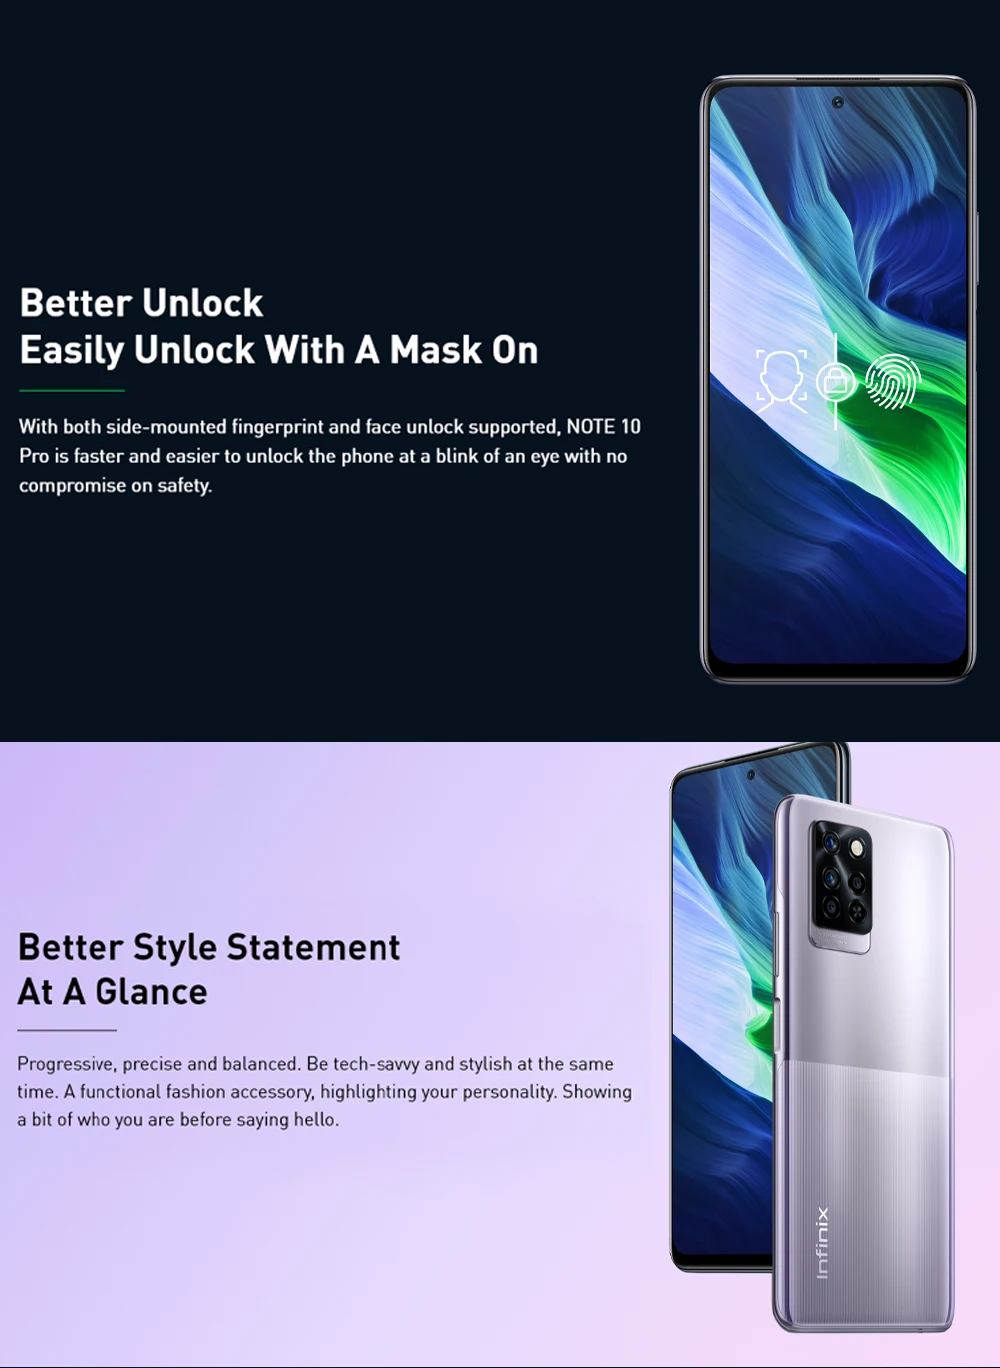 Global Version Infinix NOTE 10 PRO NFC Support 6.95'' Display Smartphone Helio G95 64MP Camera 33W Super Charge 5000 Battery infinix upcoming mobile